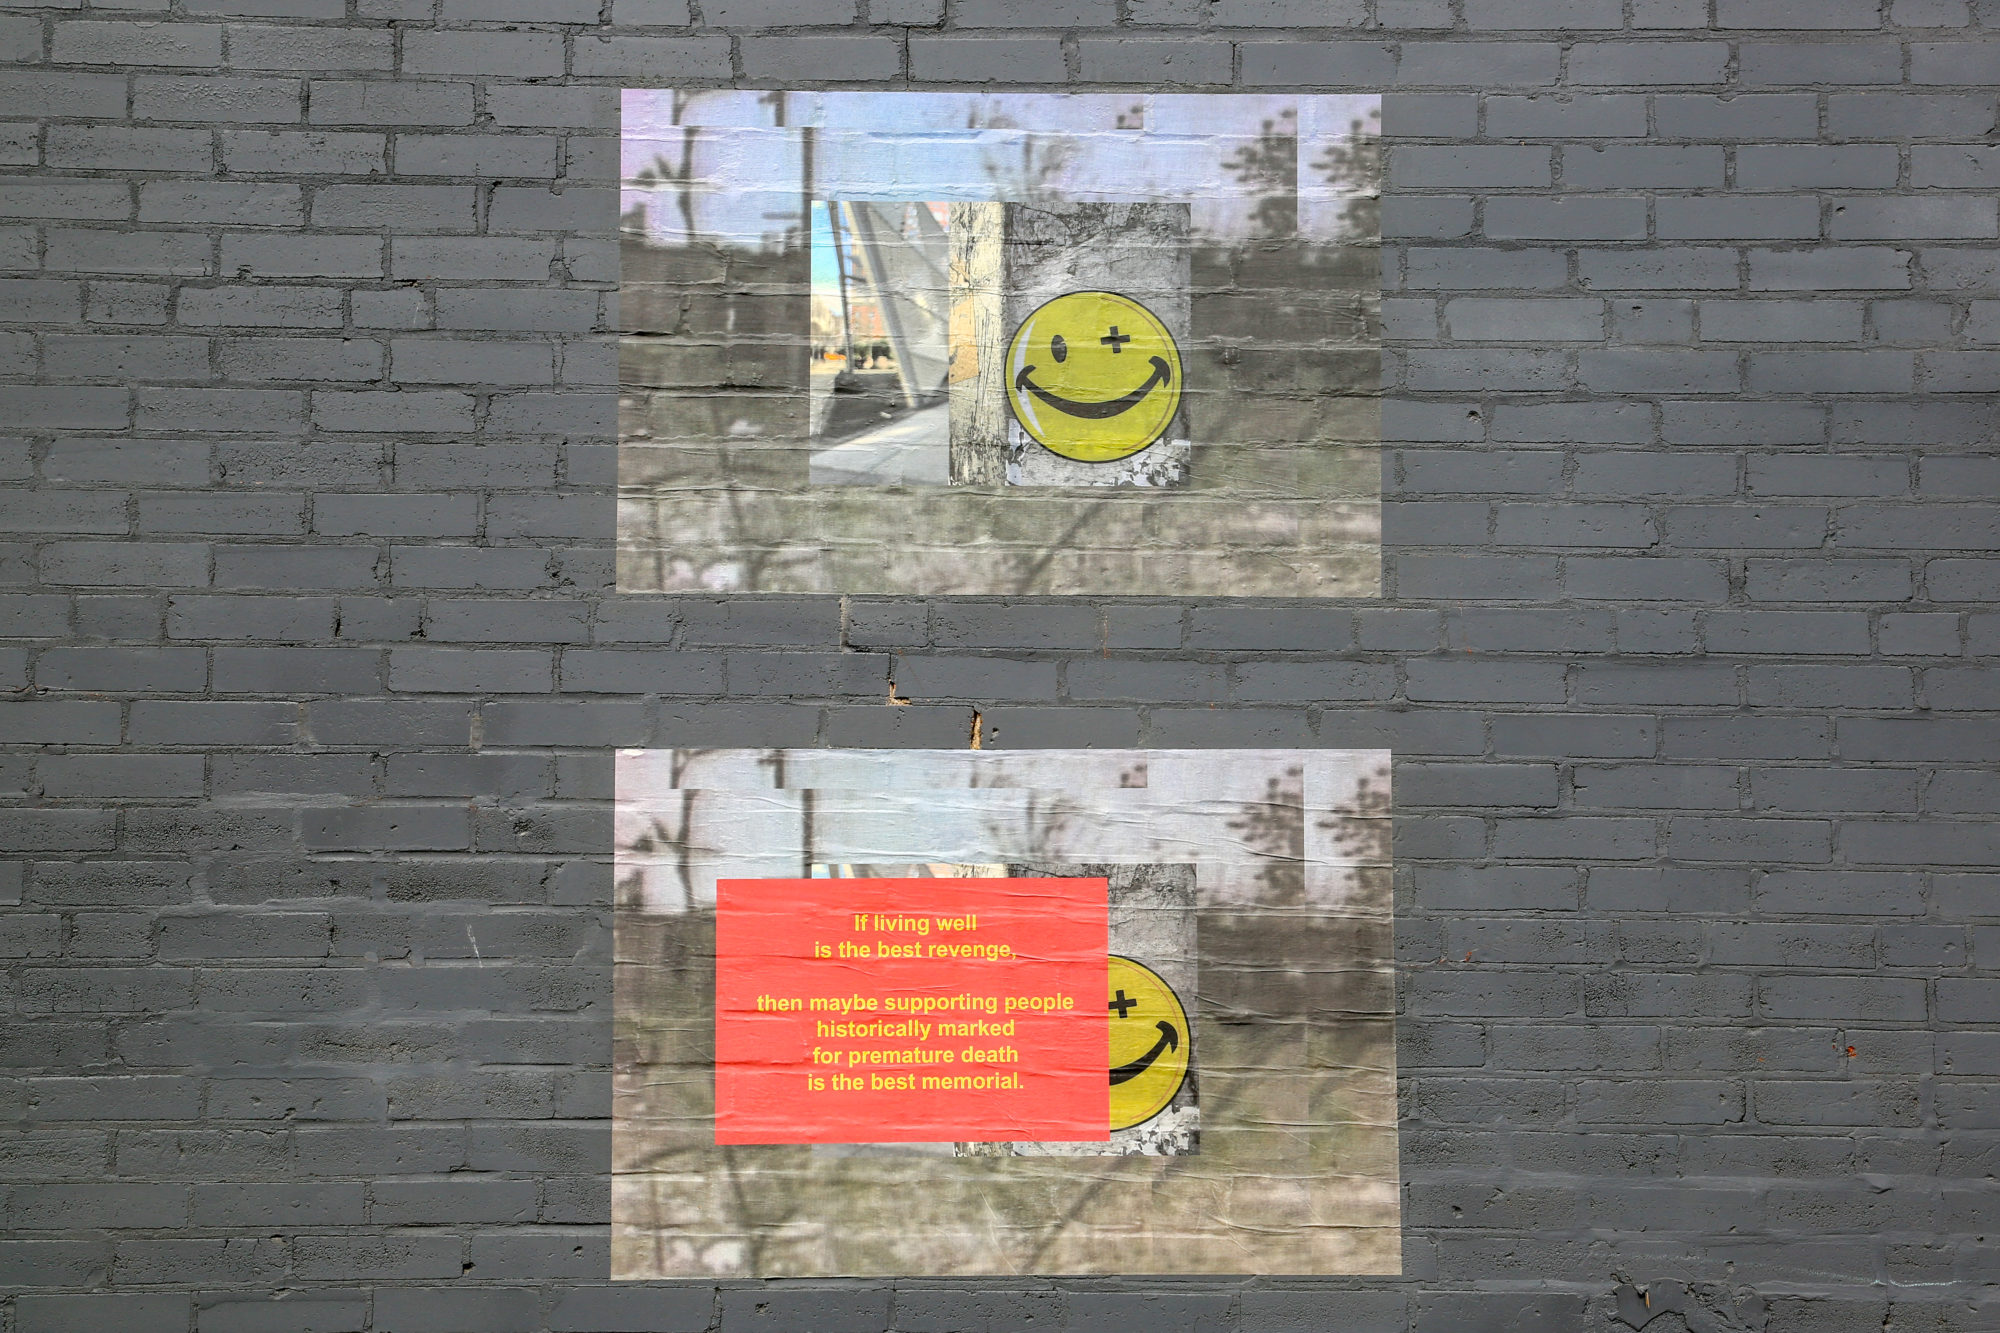 Pictures of smiley faces and words painted on gray brick wall